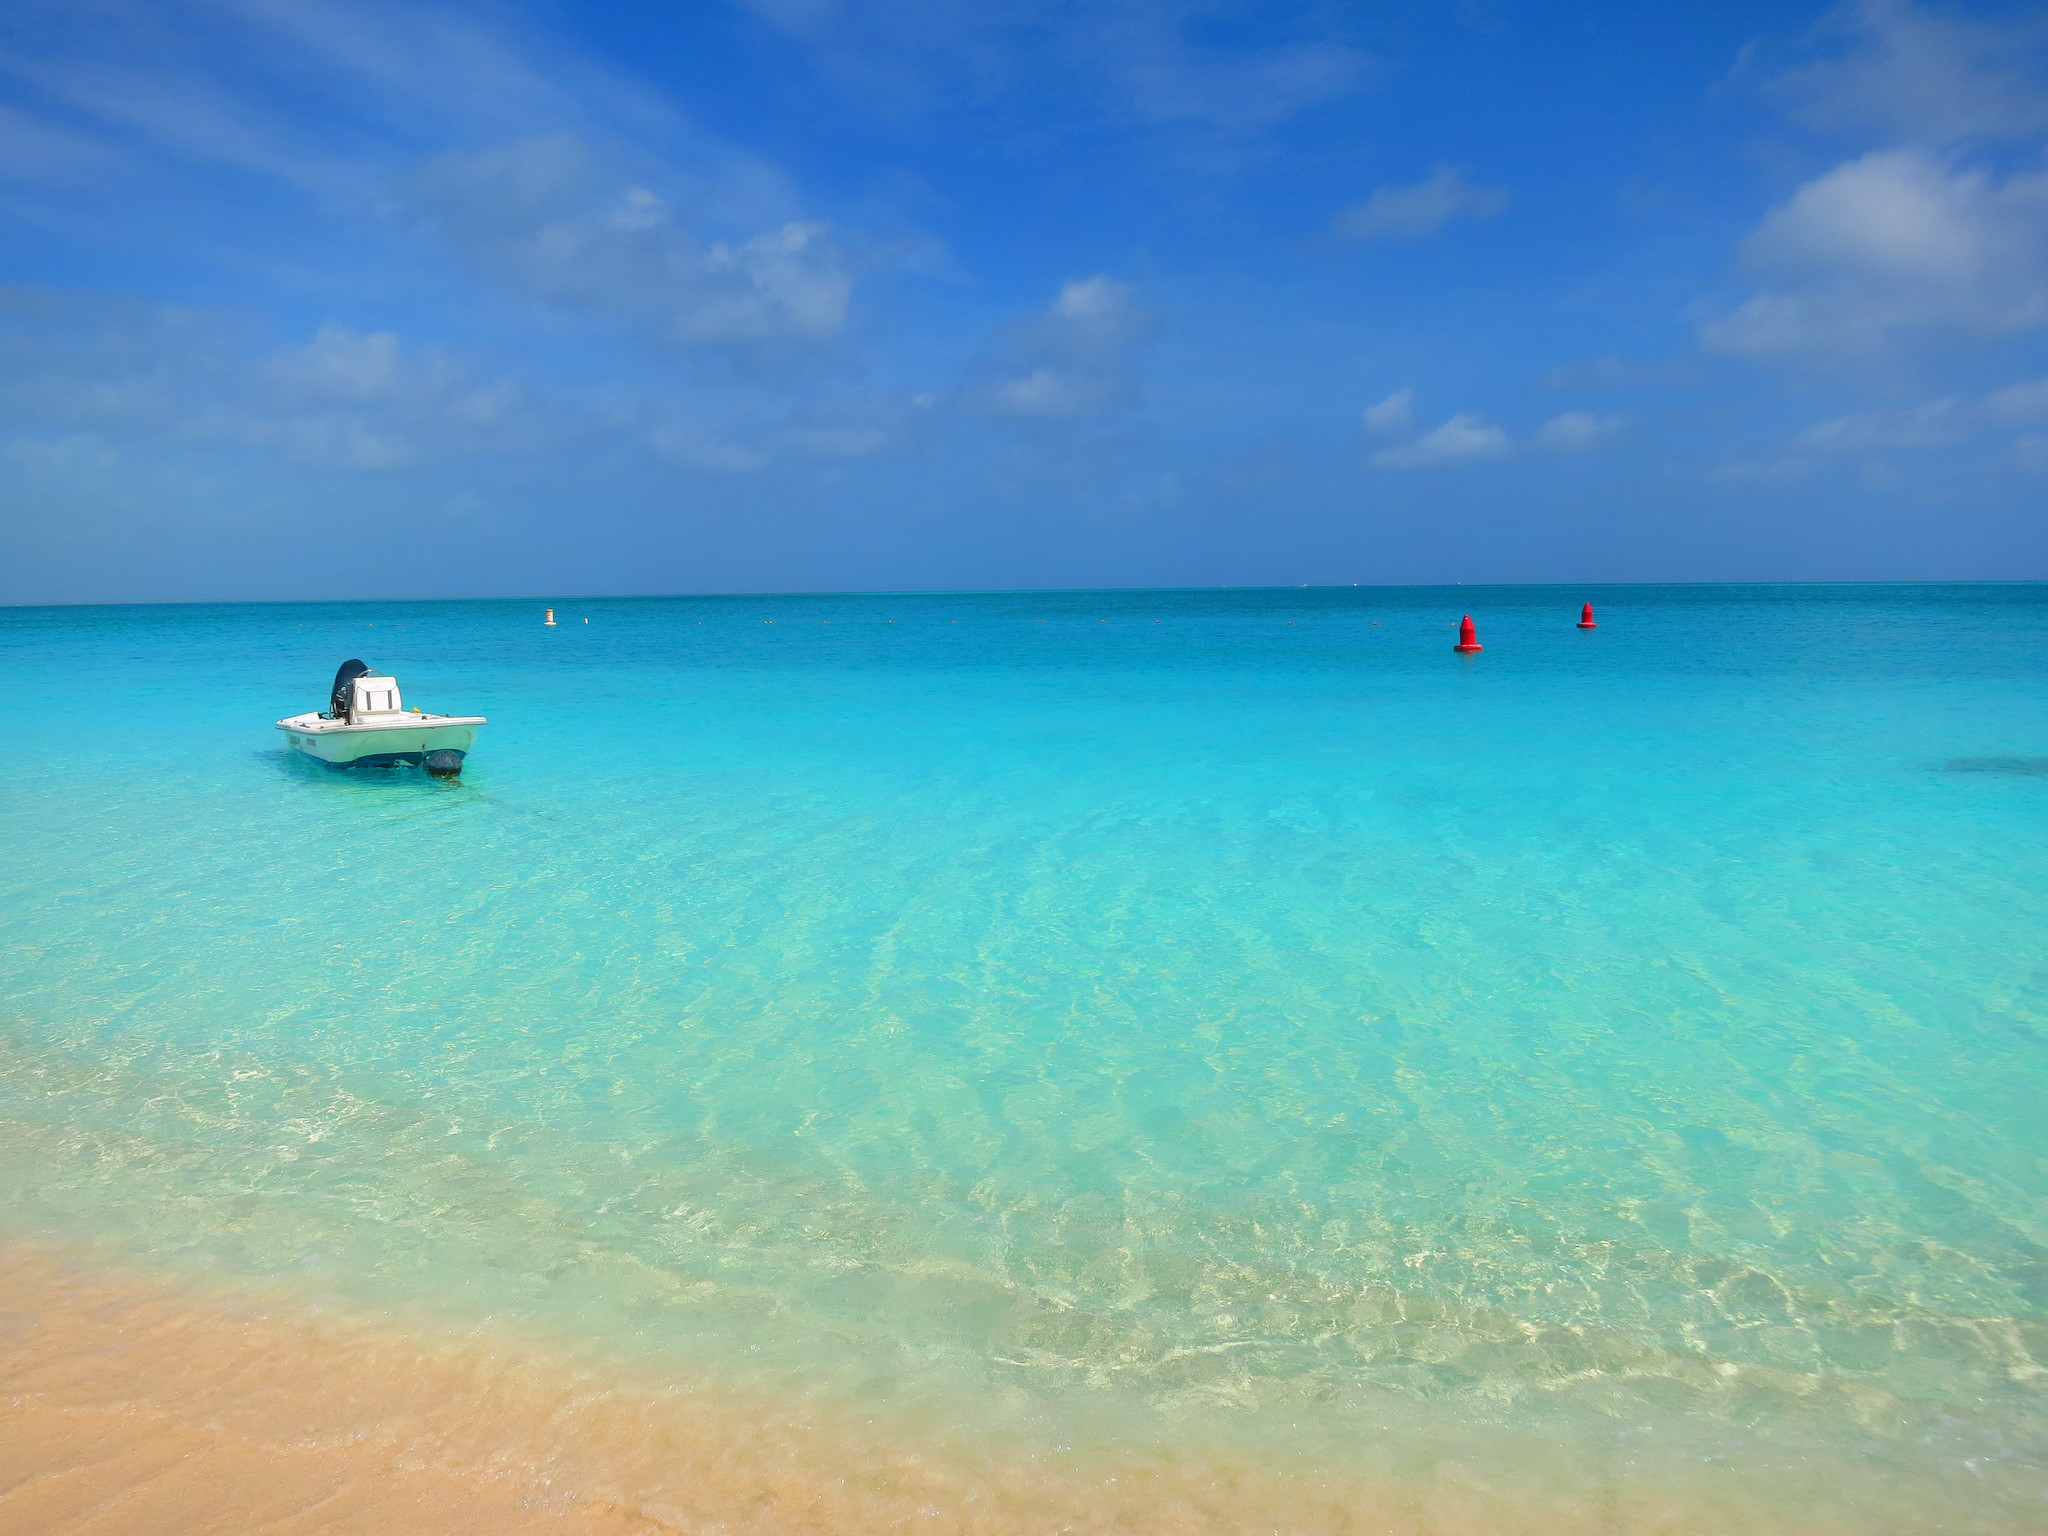 Lounging on the beach: just one thing to accomplish when you're thinking about what to do in the Caribbeanphoto by CC user grapevinetxonline on Flickr